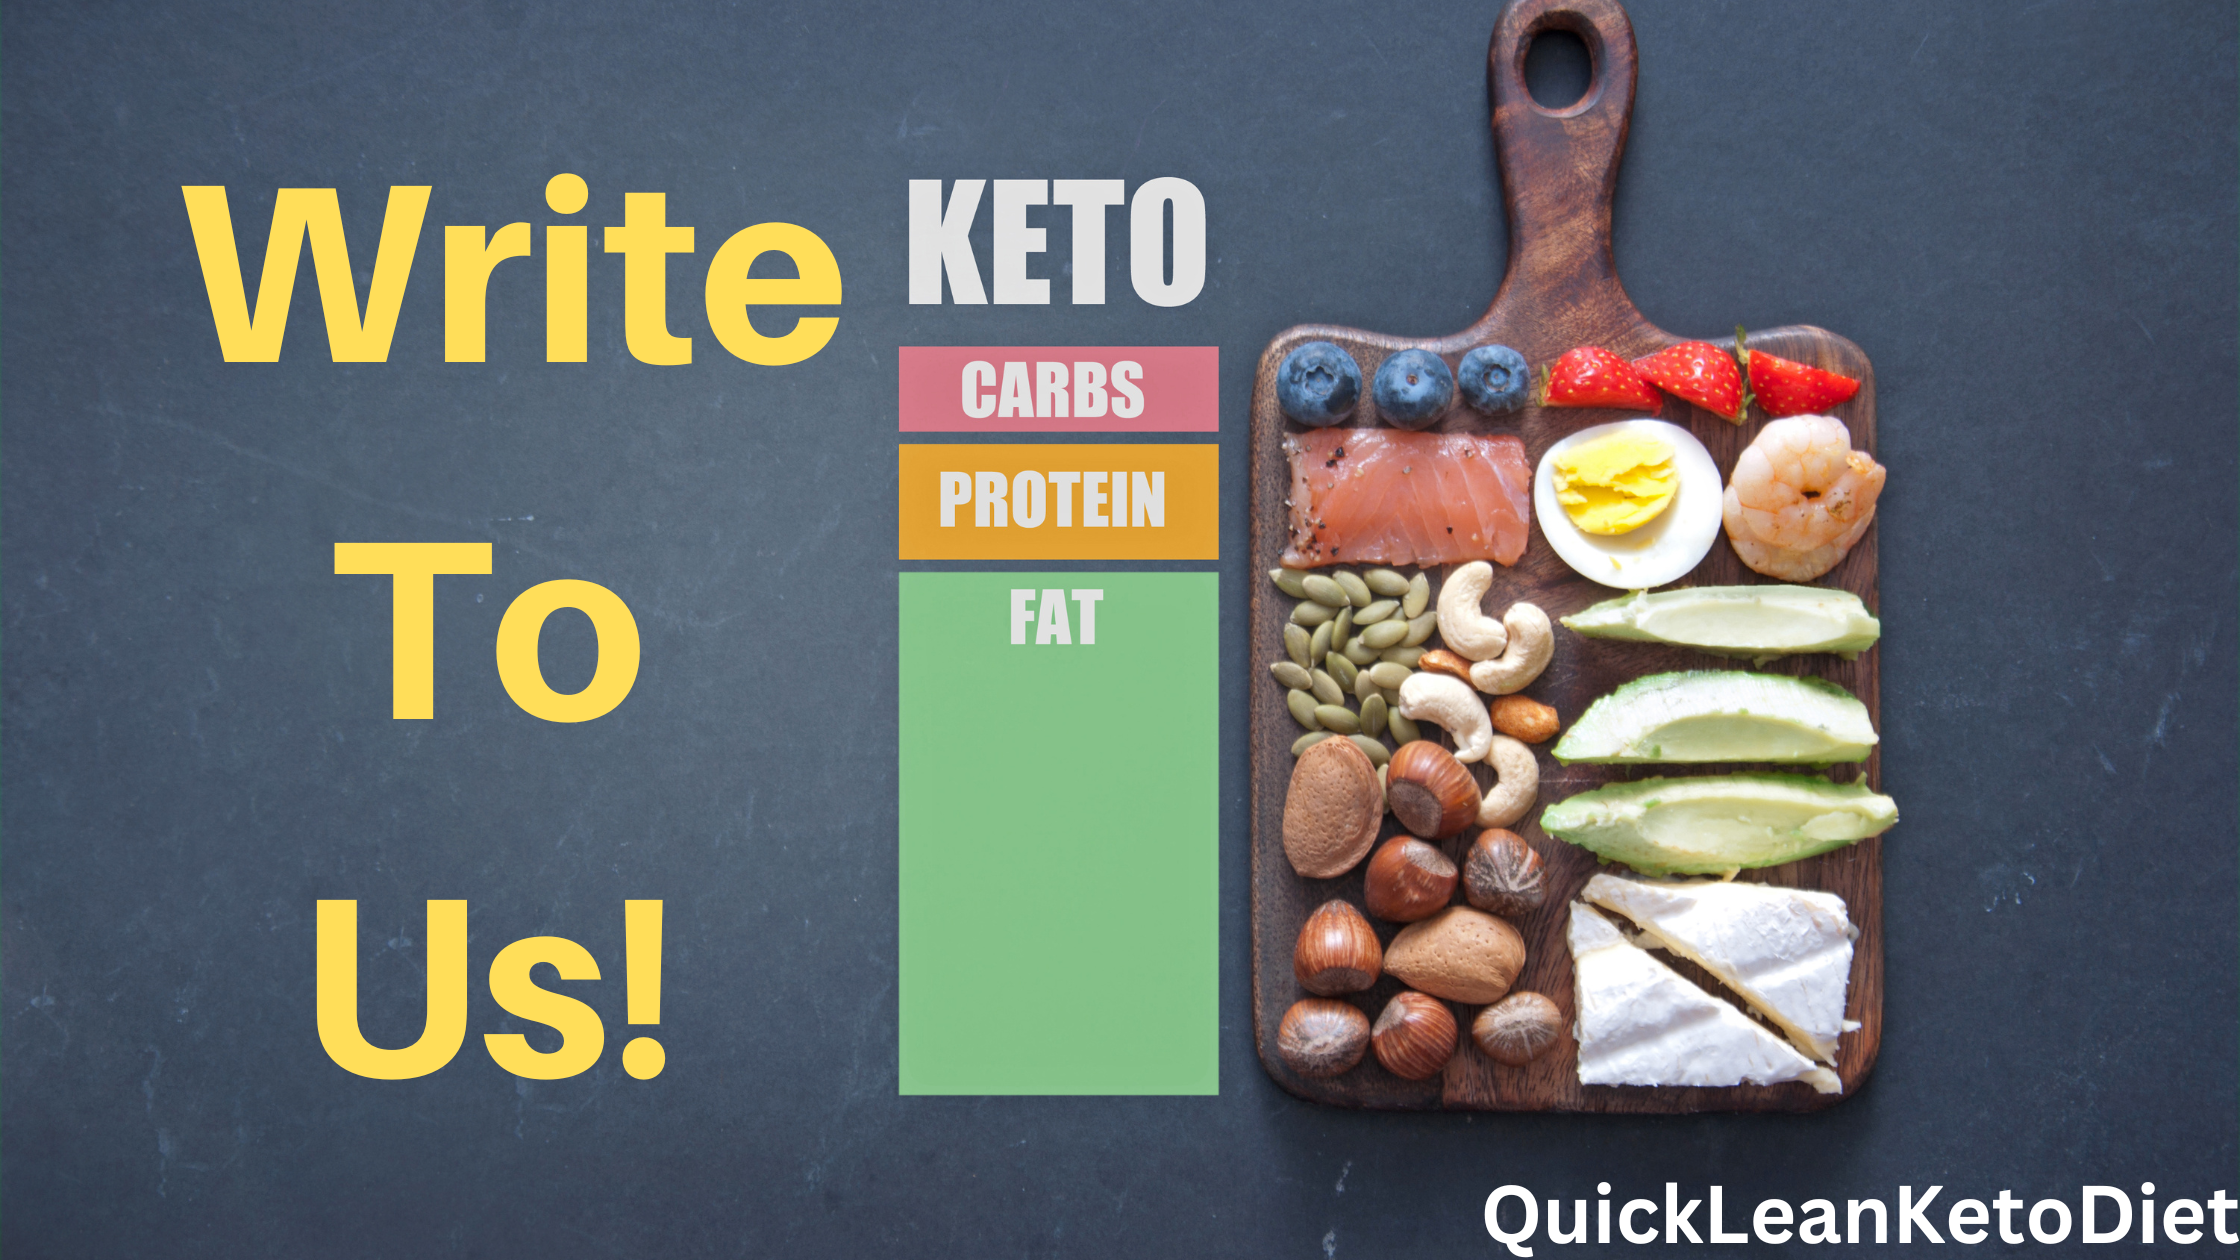 quick lean keto diet accepting guest posts